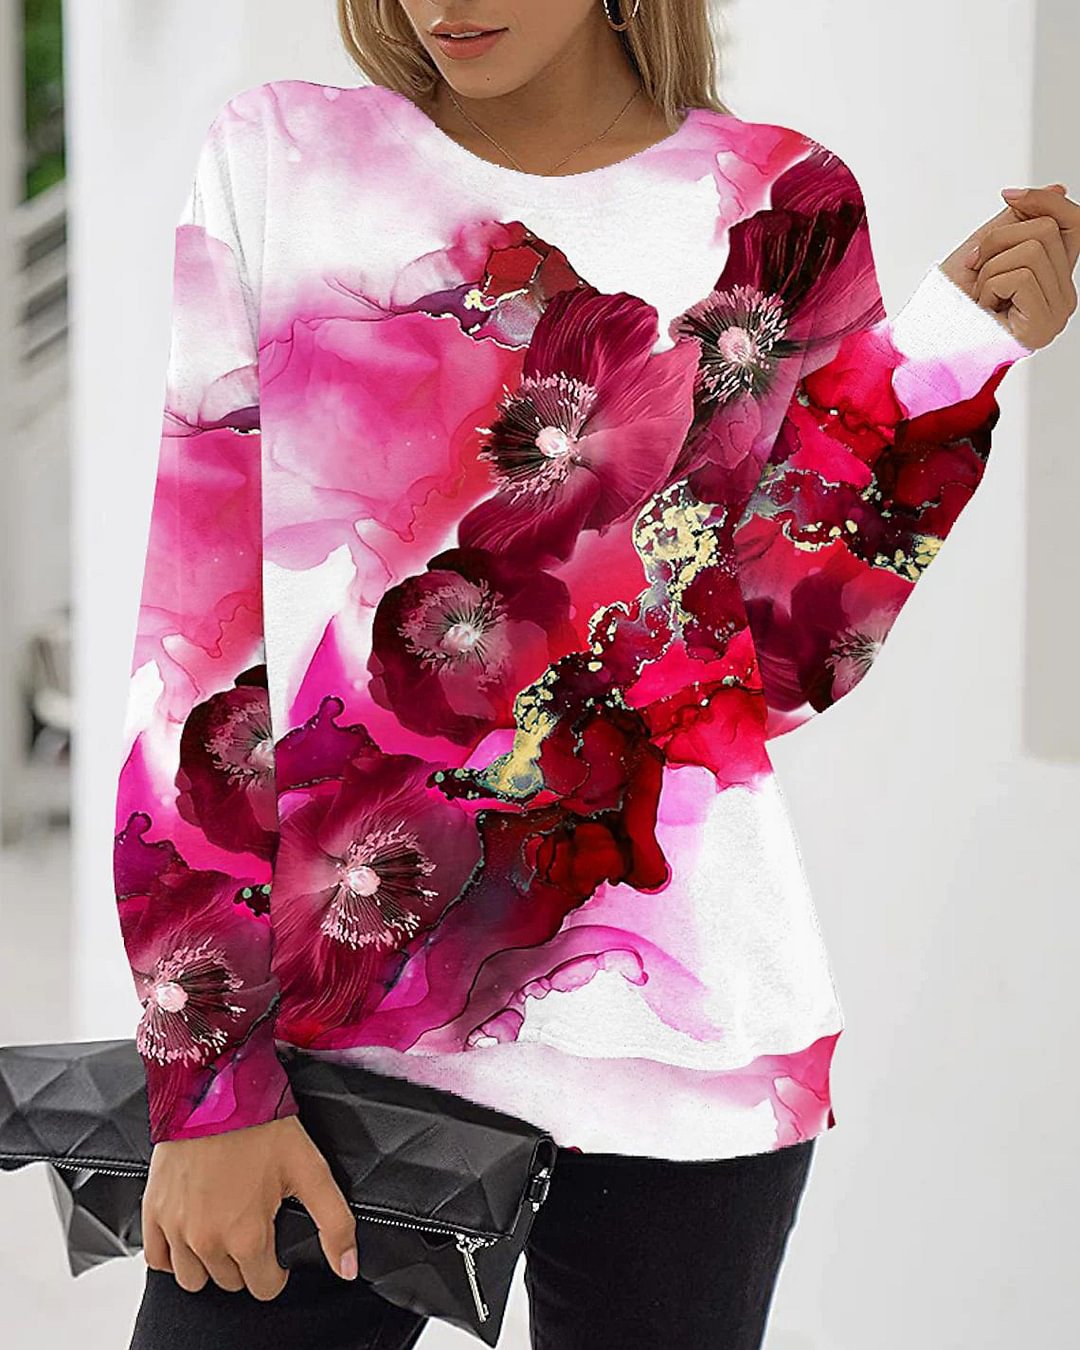 Women's Sports Pullover Floral Abstract Print Sweatshirt Top